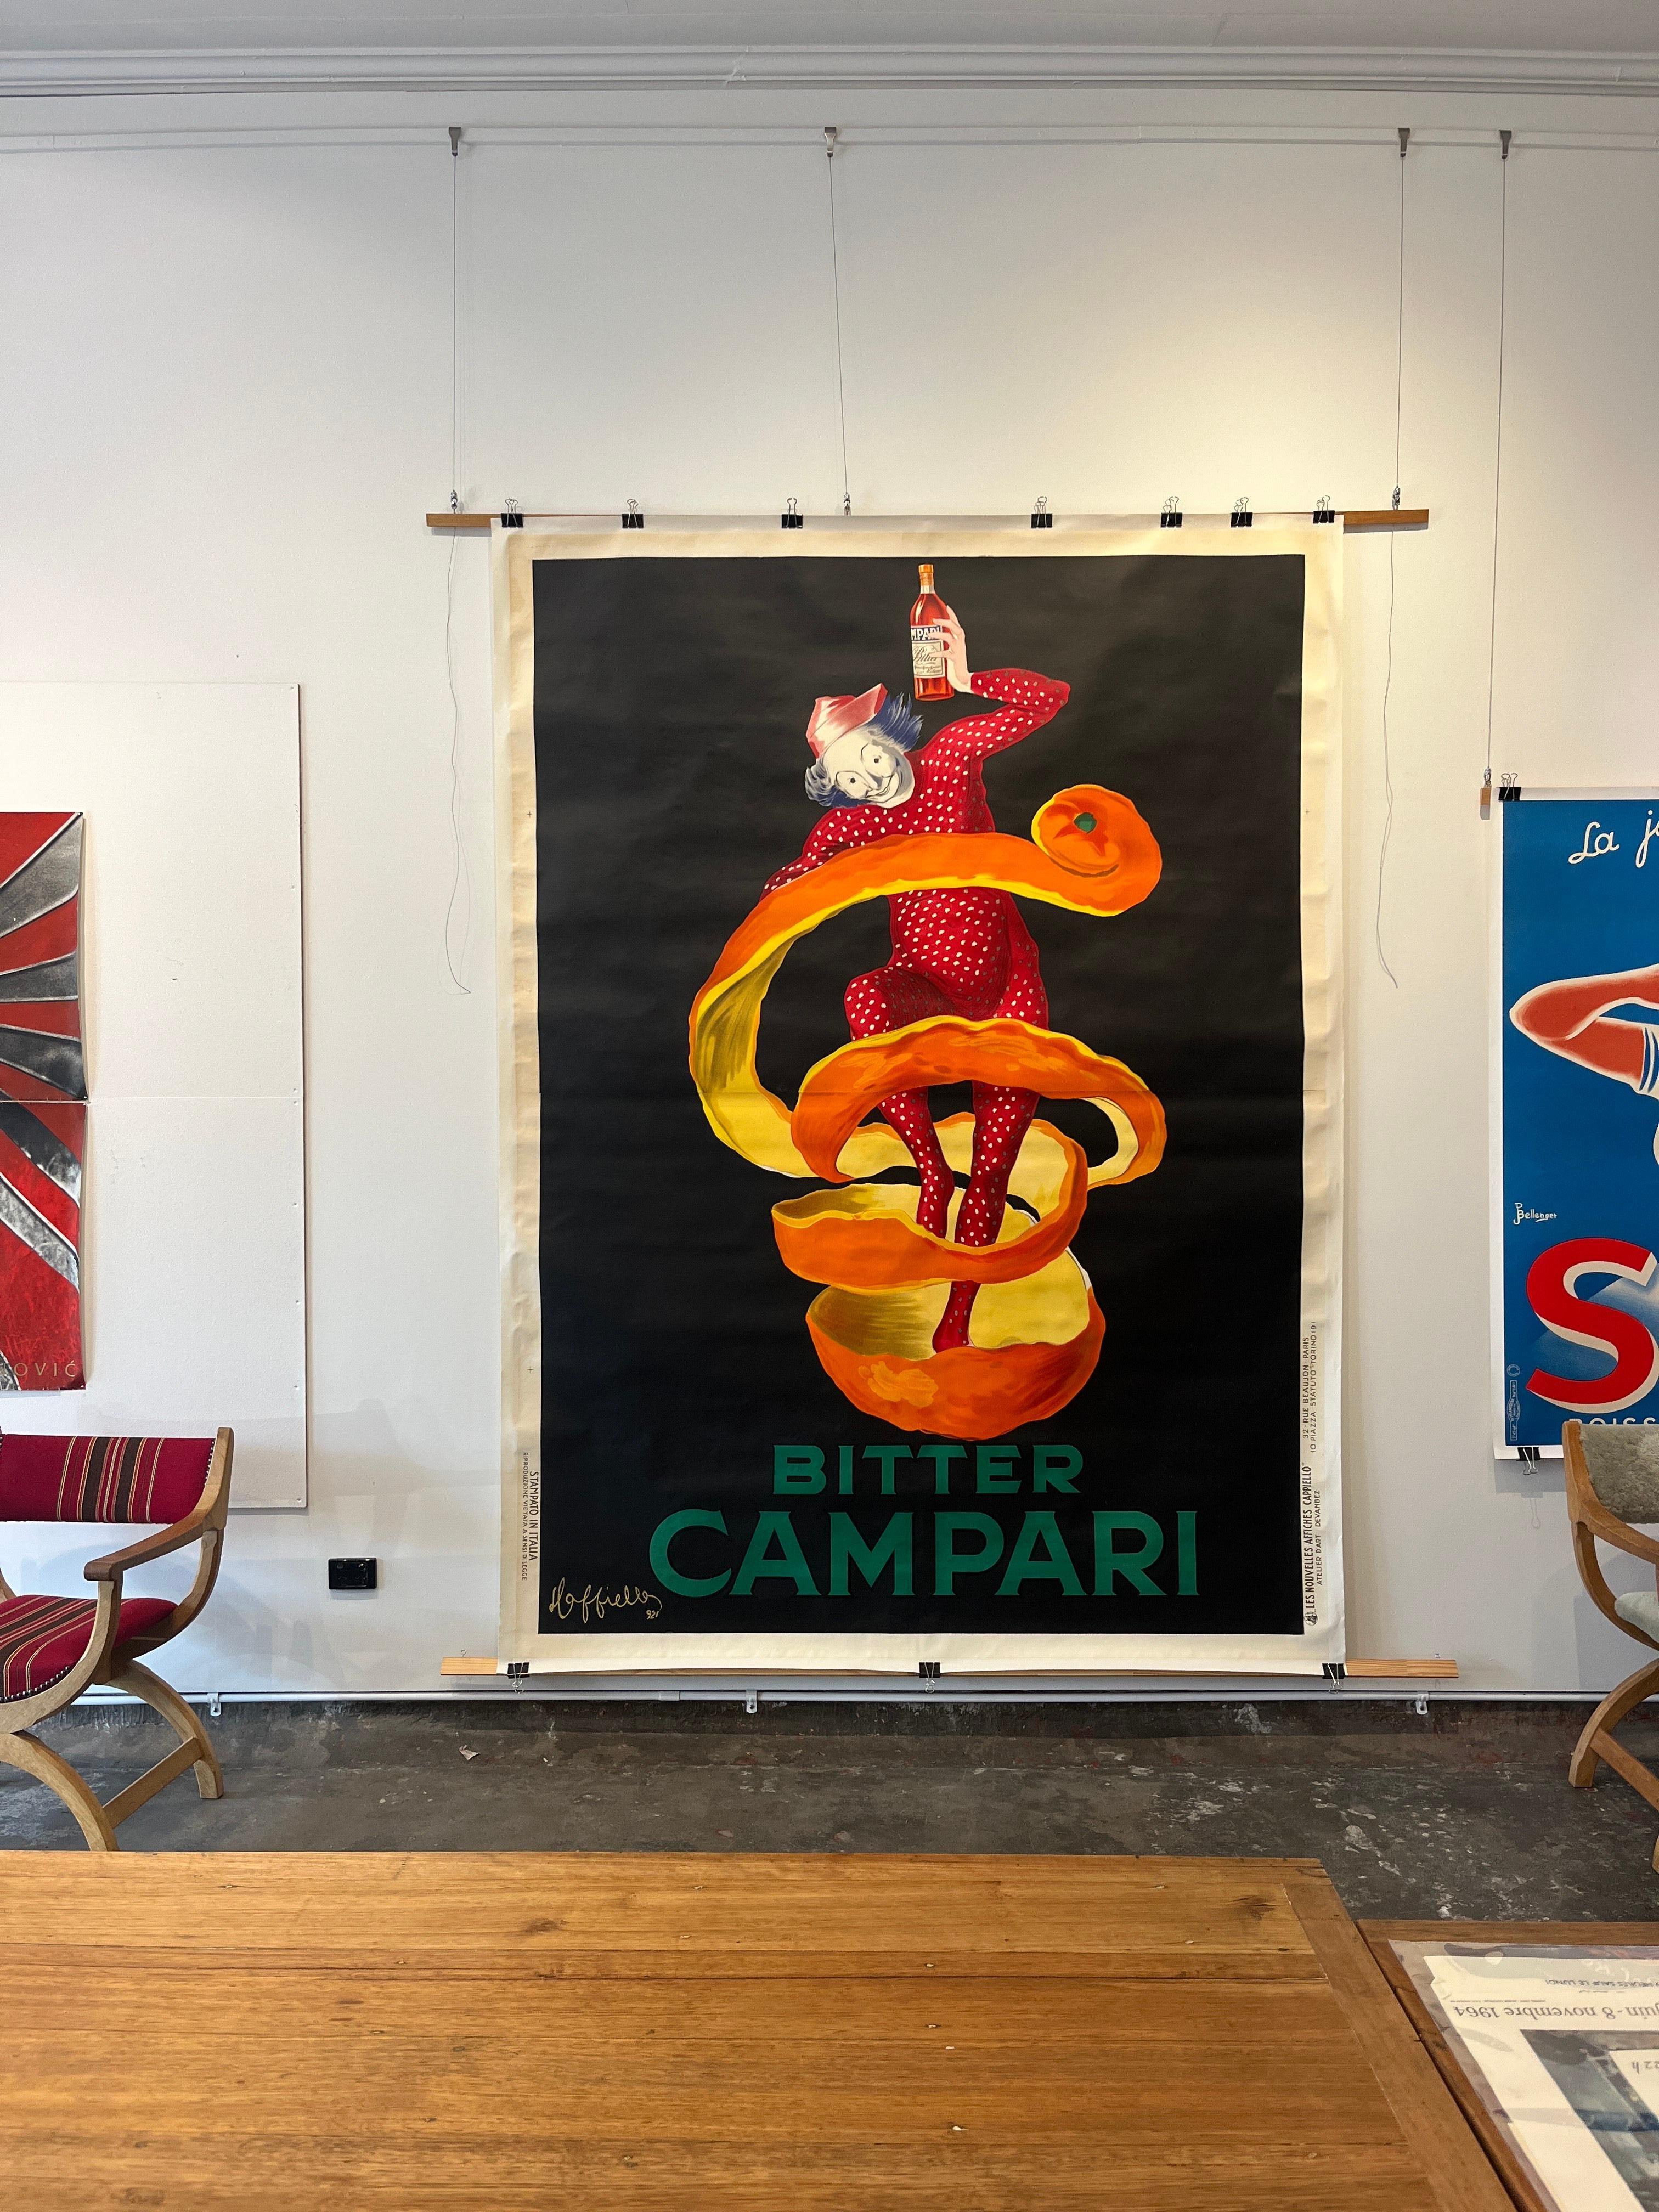 Original vintage poster Bitter Campari Spiratello Leonetto Cappiello 1921 oversize

Condition backing / material: Linen (backed on acid-free paper and cotton canvas)

Printer, publisher or brands: DEVAMBEZ

Rare poster oversized 201 x 277cm.